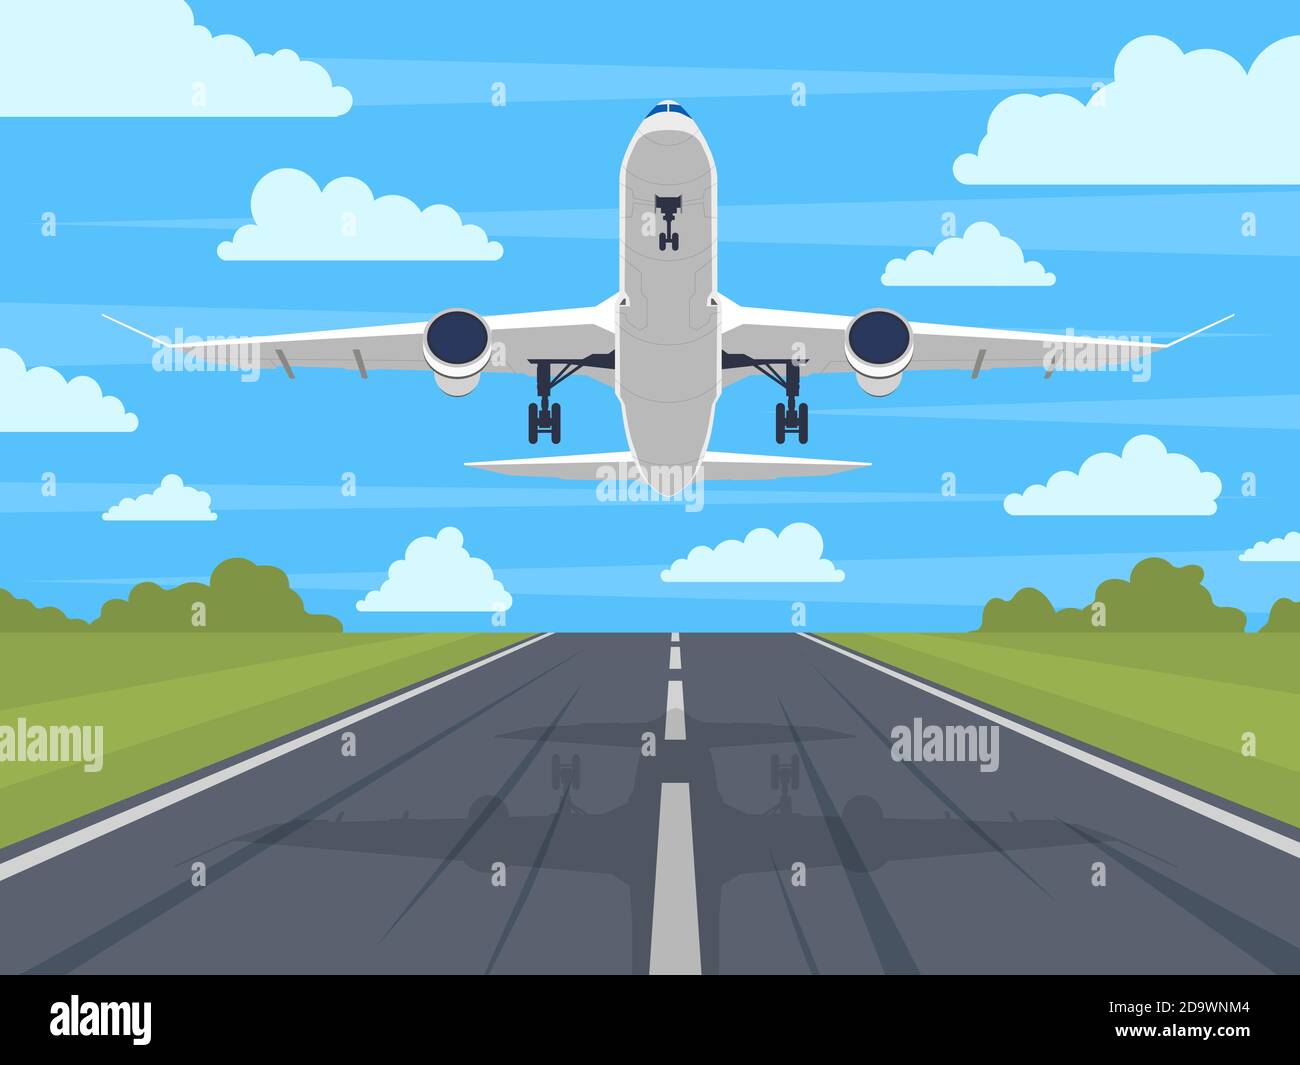 Airplane runway. Landing or taking off plane, passenger airplane in blue sky. Airport runway travel or vacation vector illustration Stock Vector